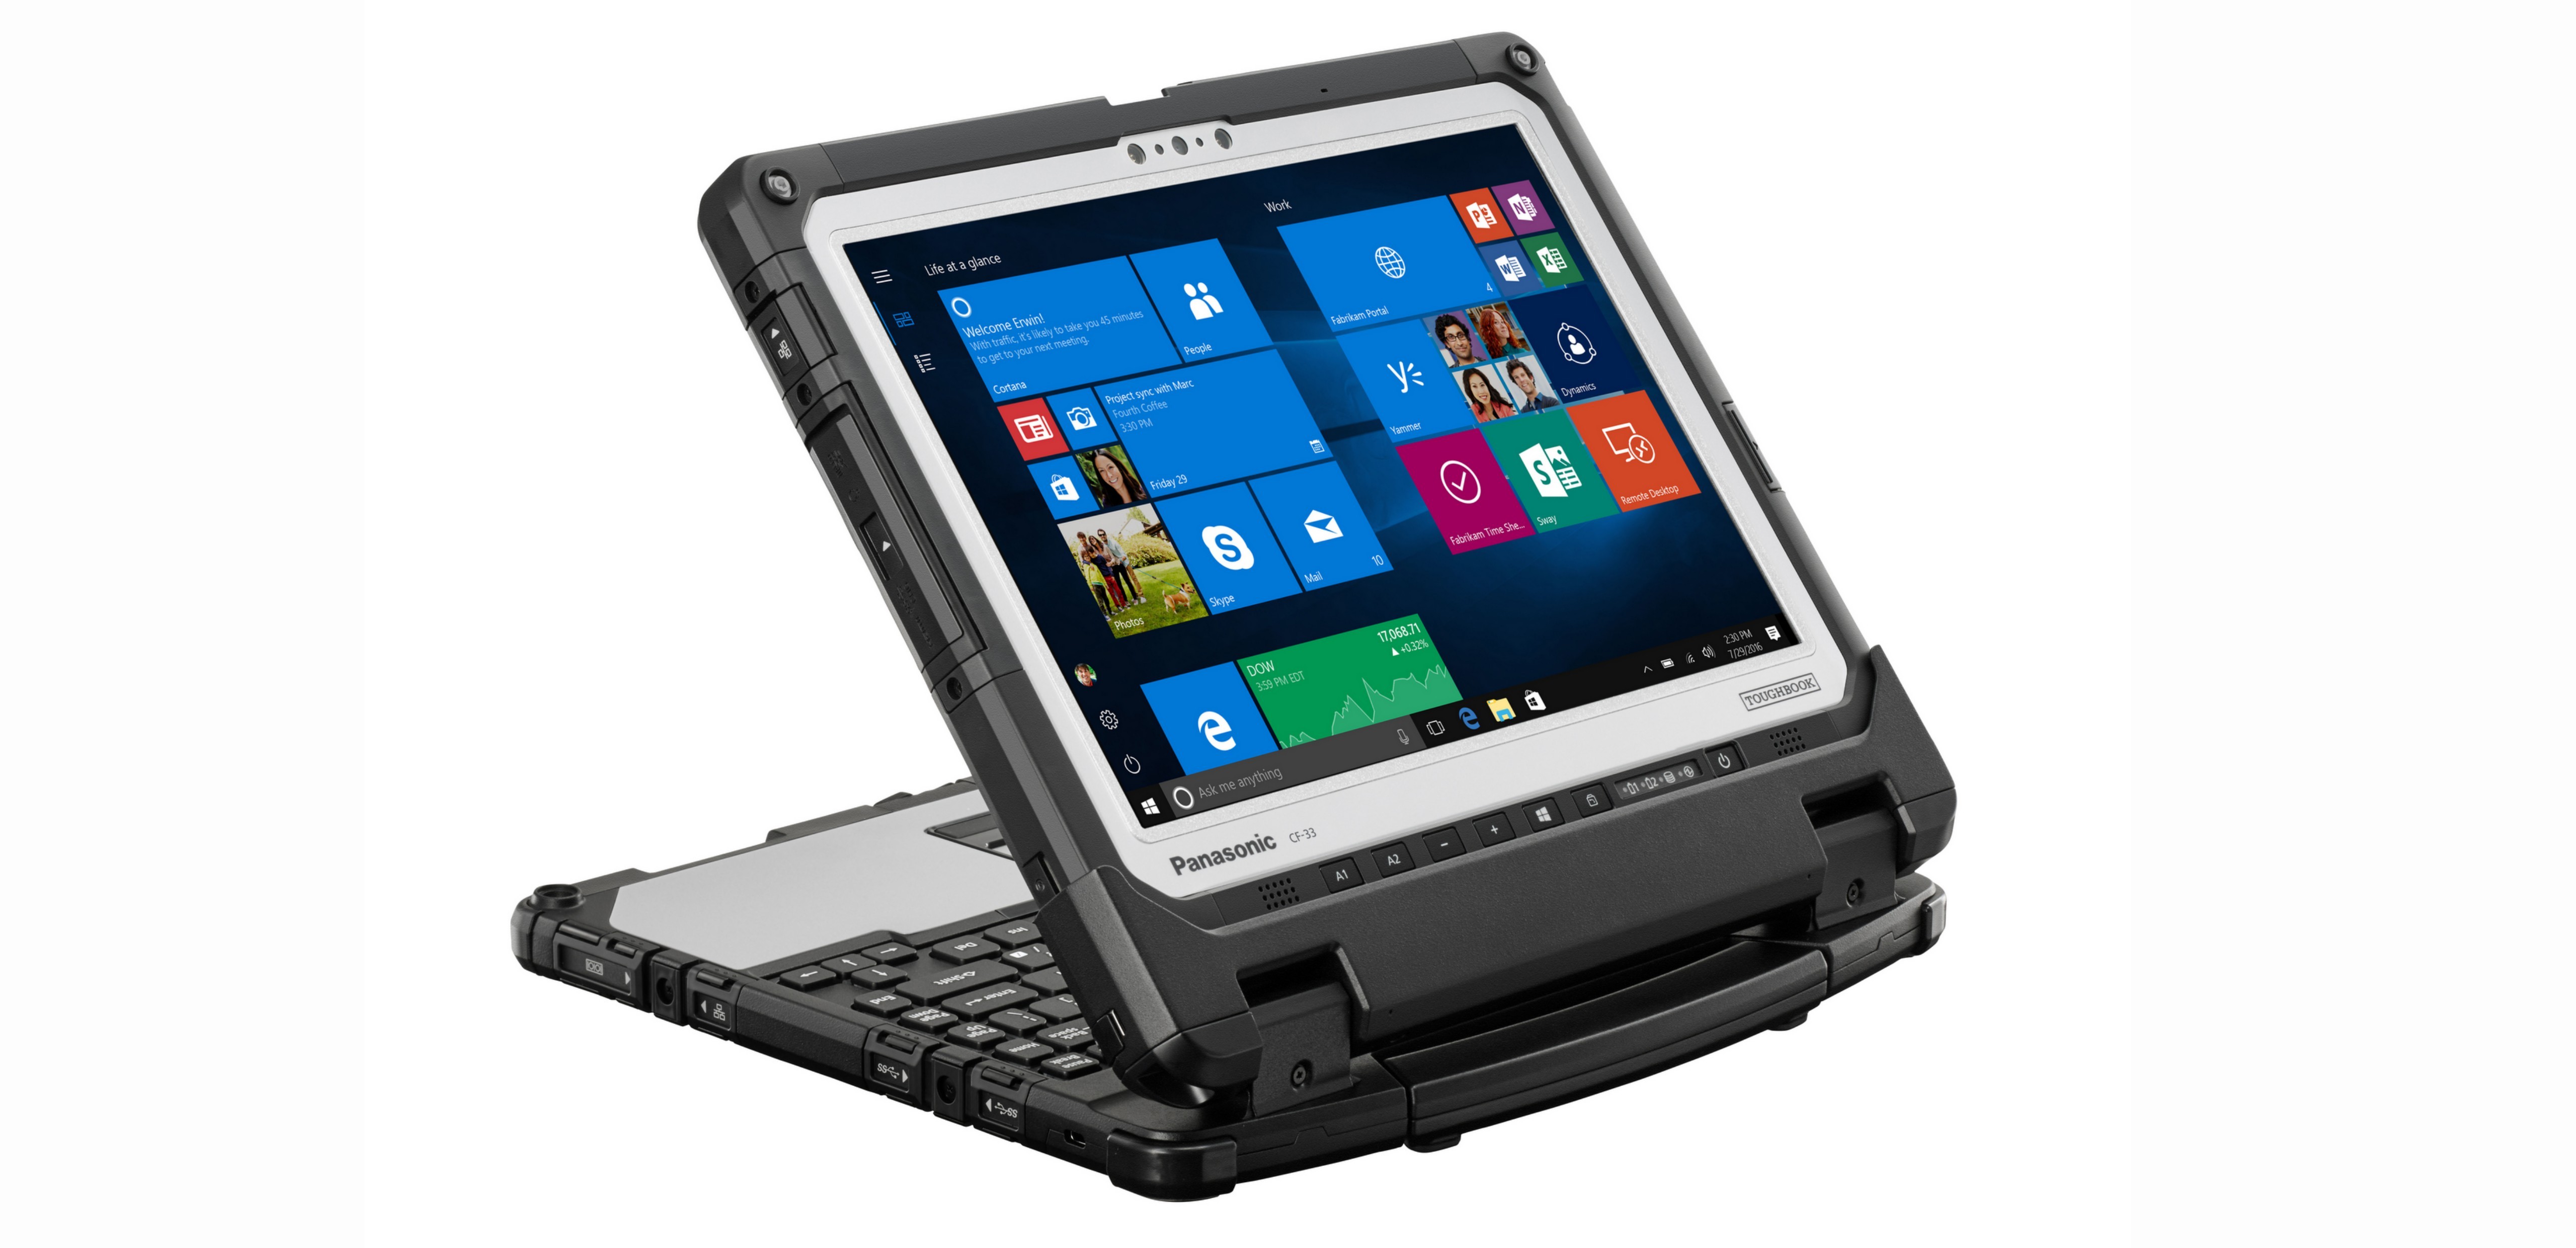 Panasonic Toughbook 33, a 2-in-1 detachable laptop powered by Windows 10